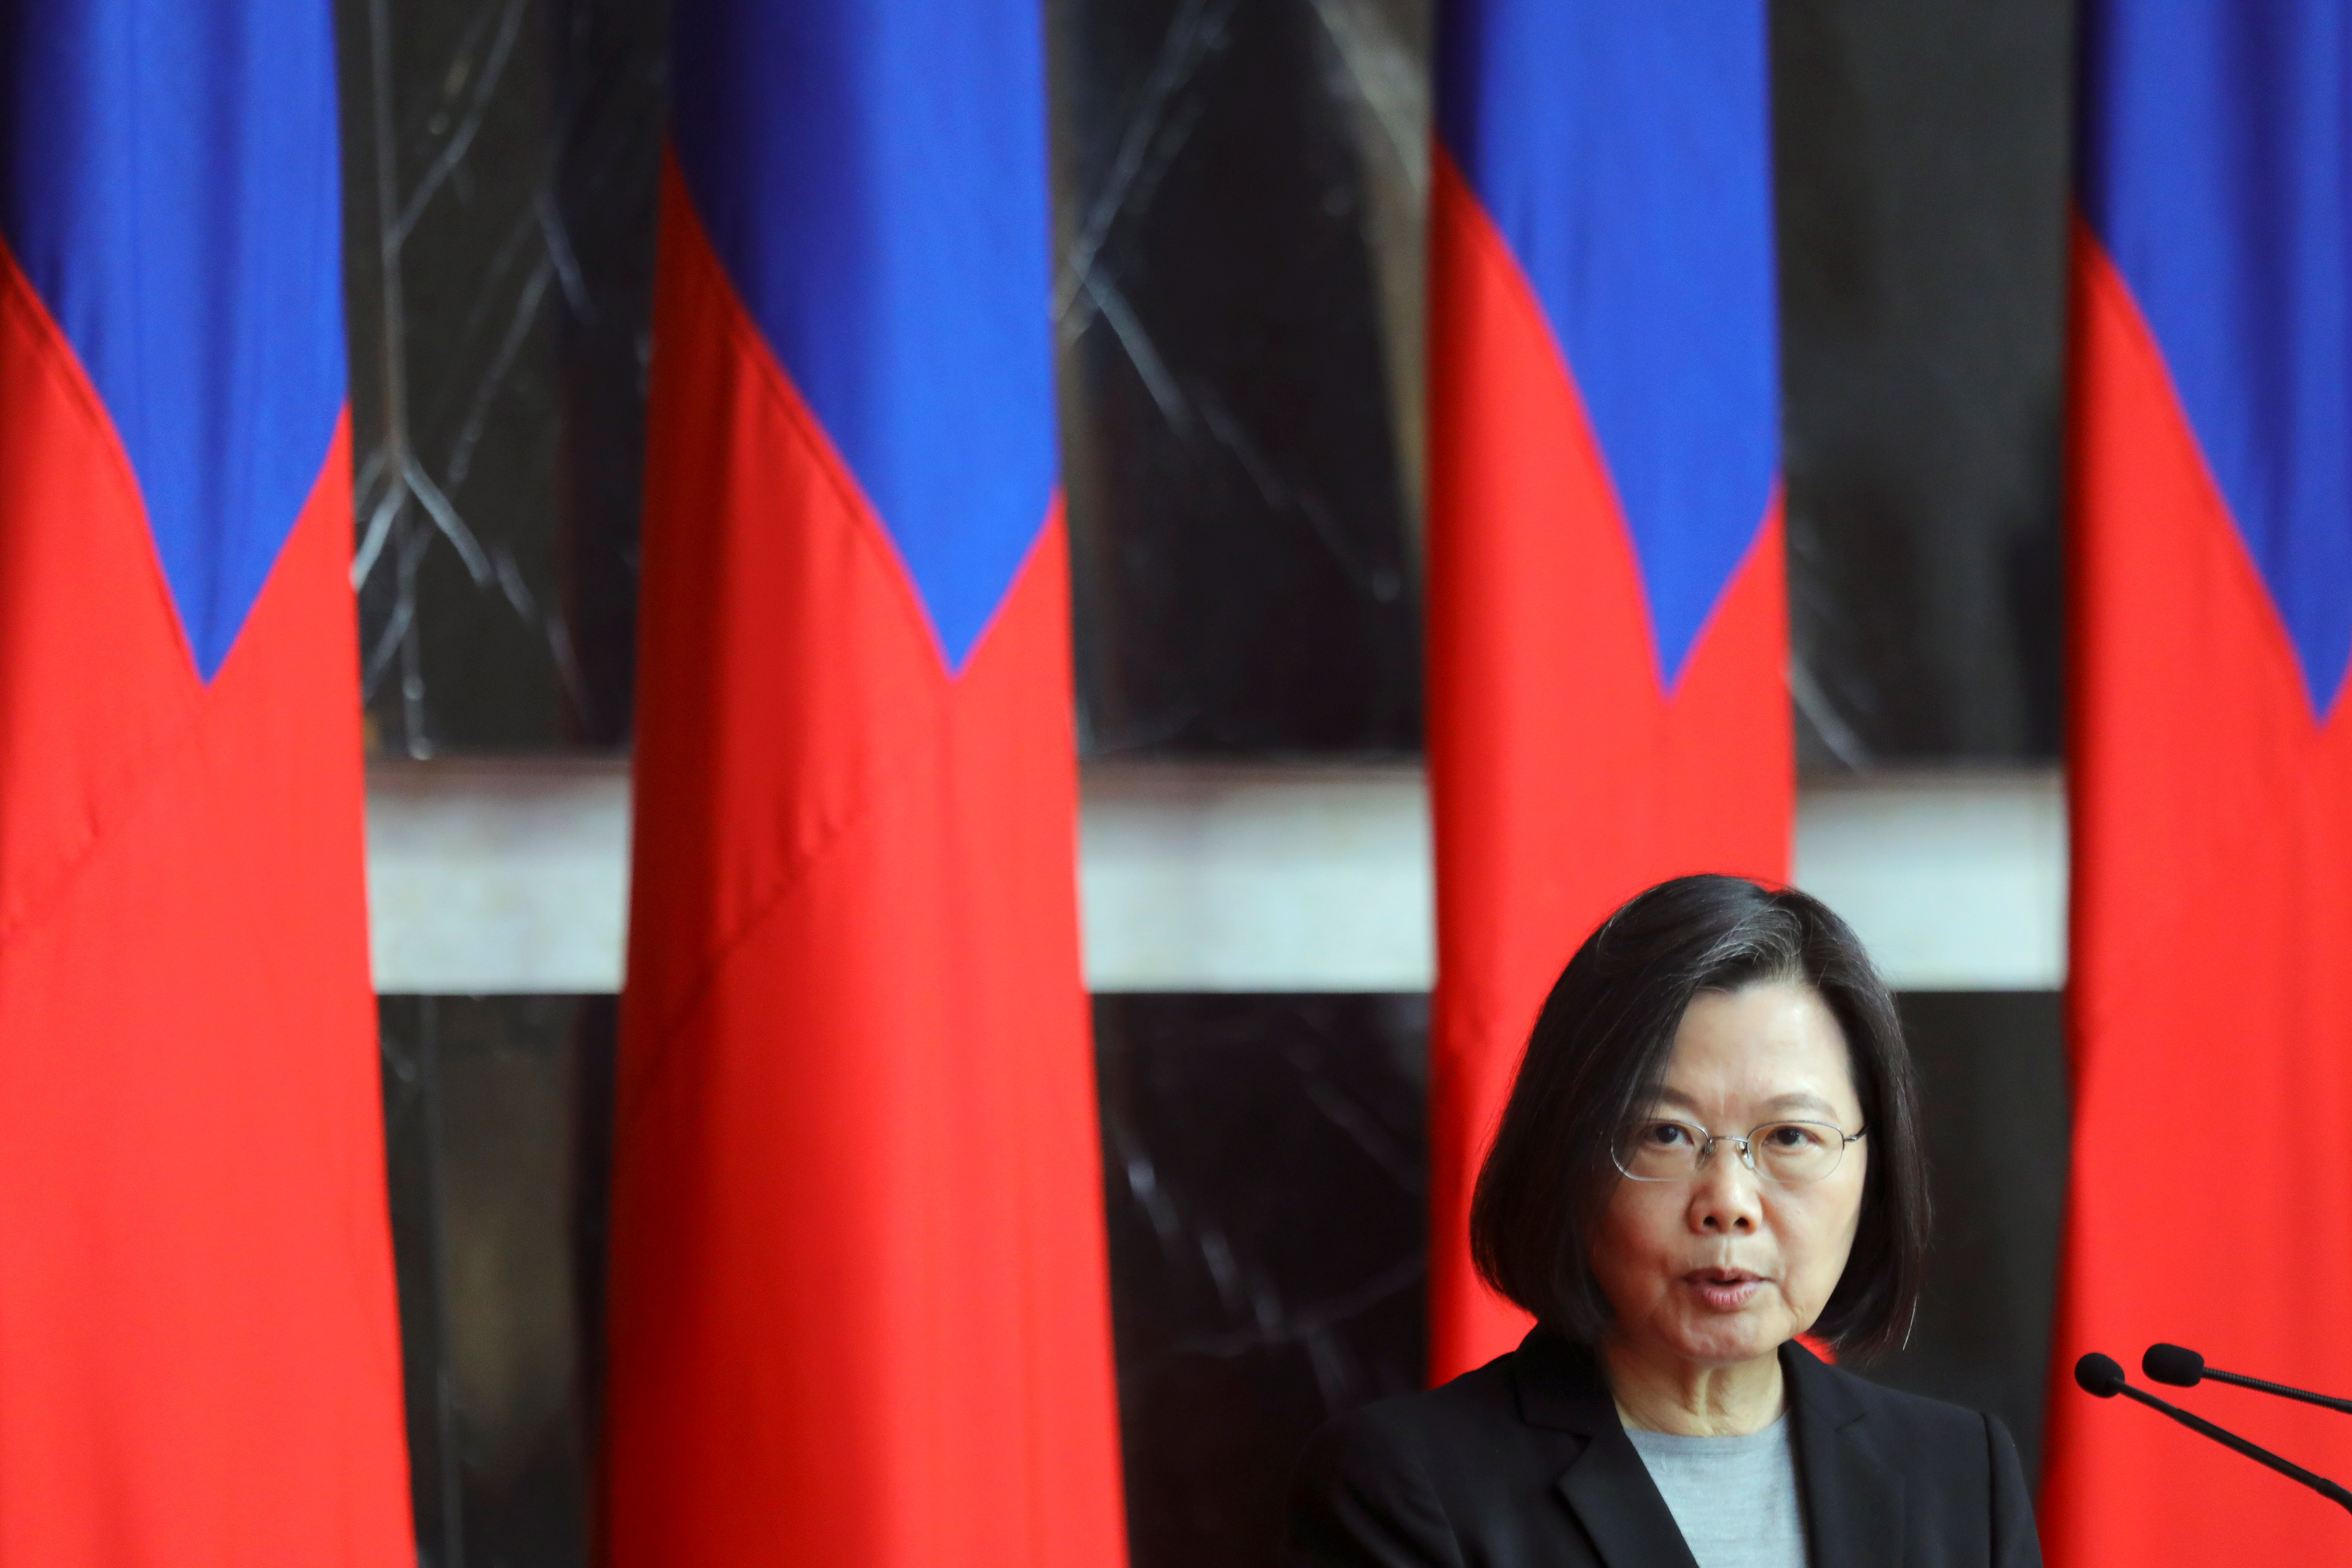 Taiwan President Tsai Ing-wen speaks at a rank conferral ceremony for military officials, in Taipei